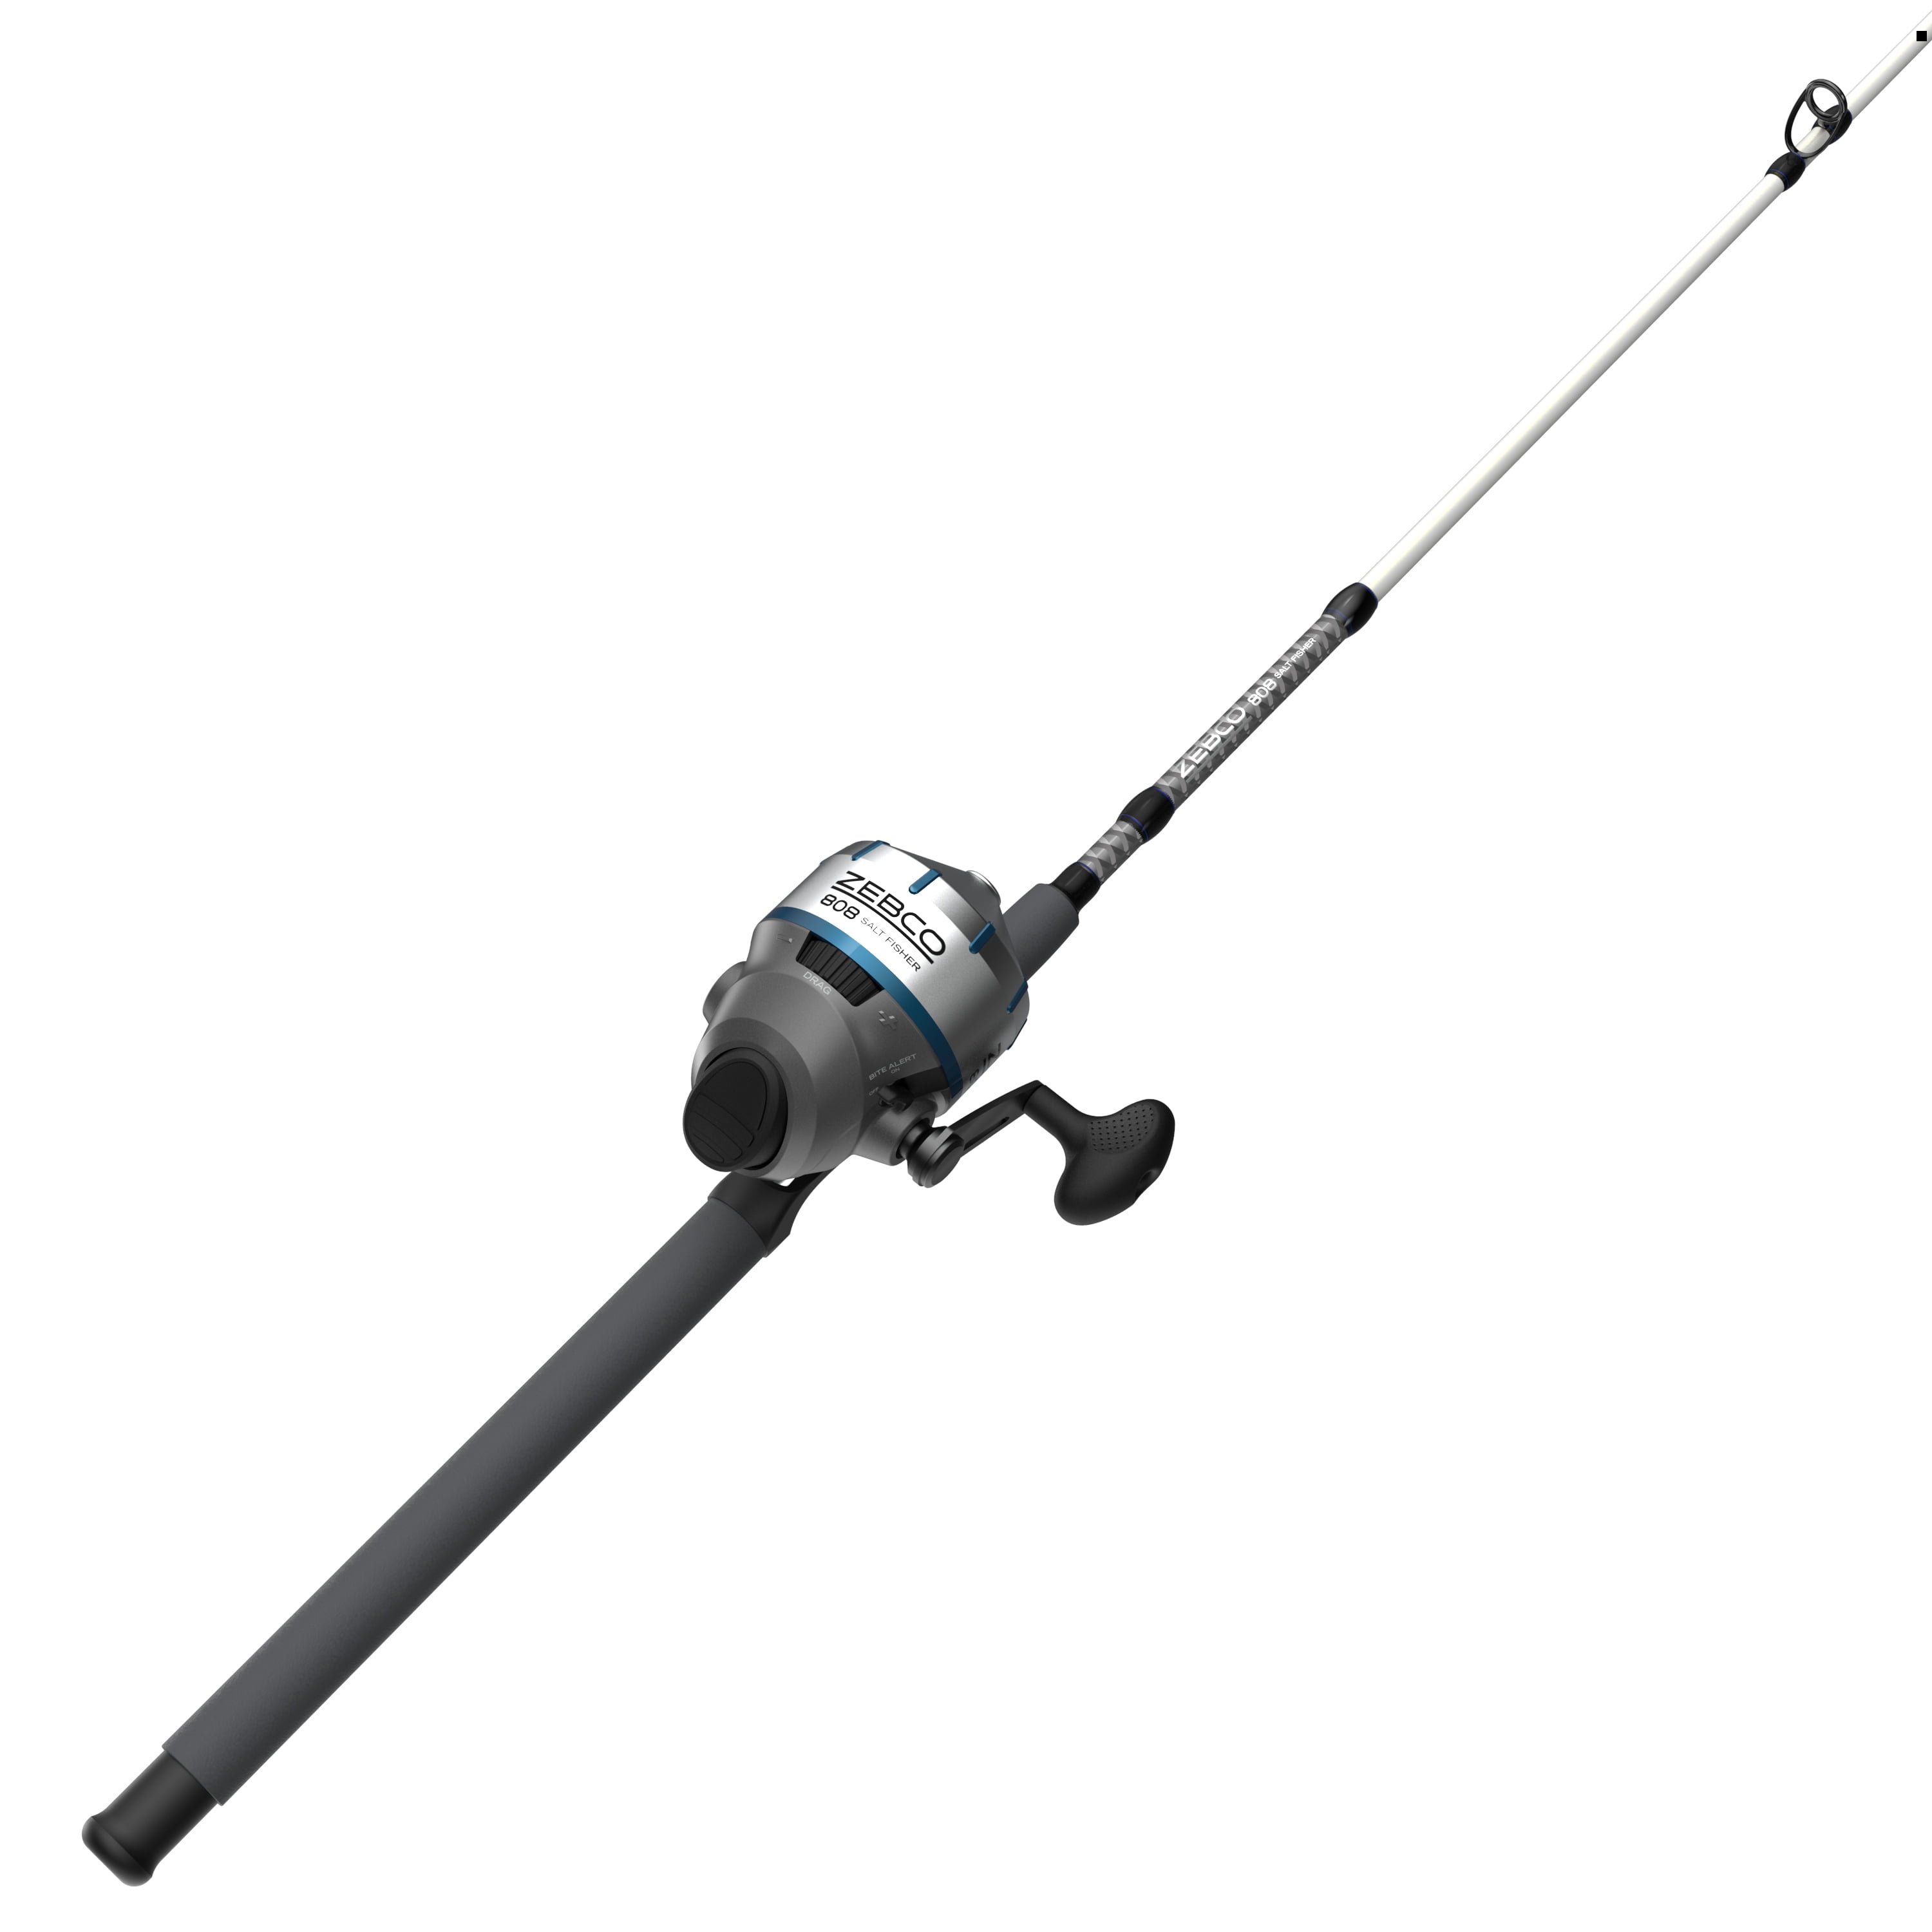 Zebco 808 Saltwater Spincast Reel and Fishing Rod Combo, 7-Foot 2-Piece Fishing Pole, Size 80 Reel, Changeable Right- or Left-Hand Retrieve, Pre-Spooled with 20-Pound Zebco Line, Black